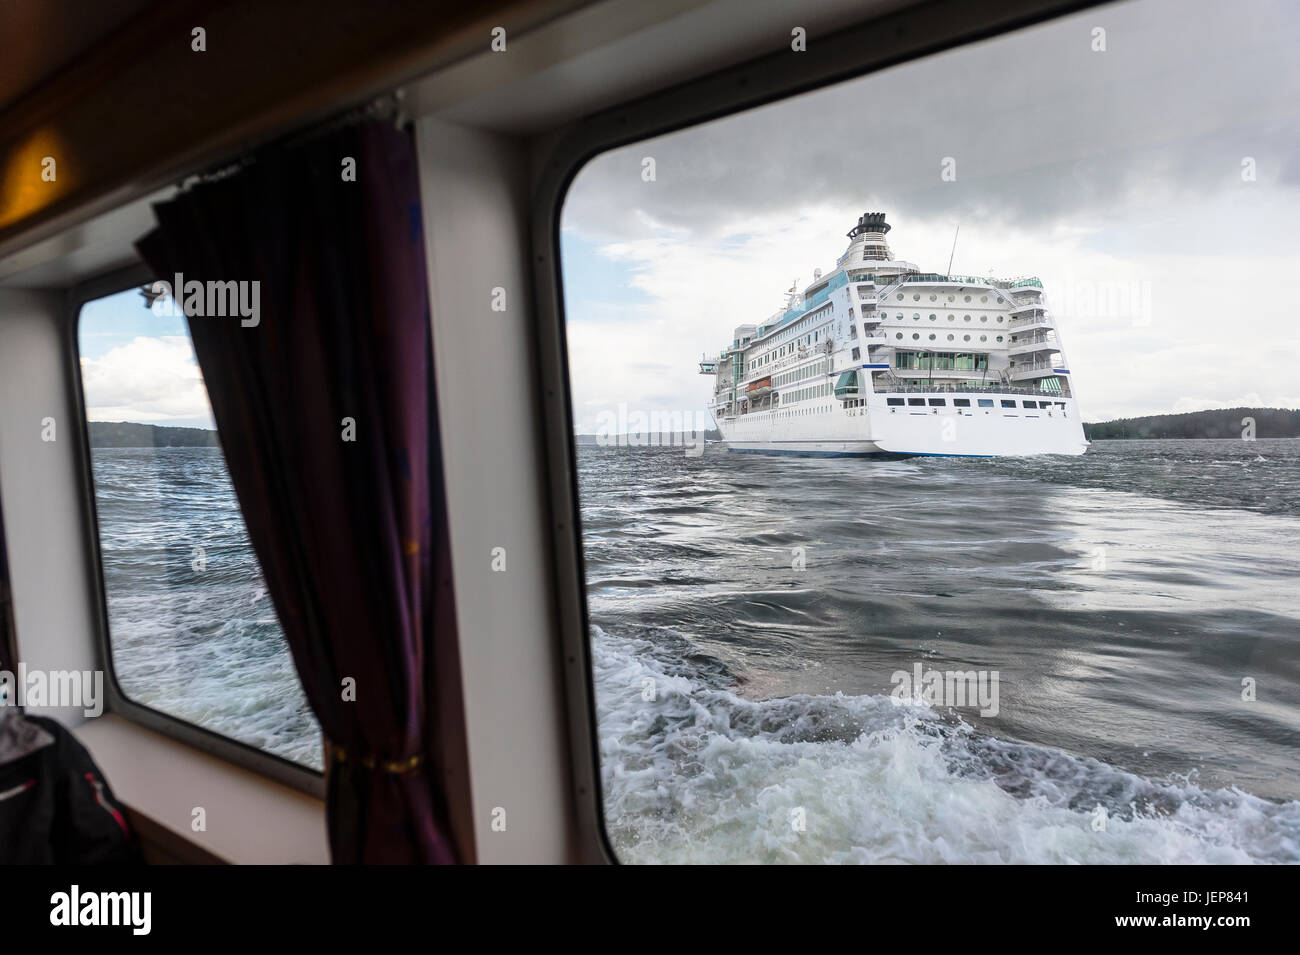 Cruise ship seen from boat Stock Photo